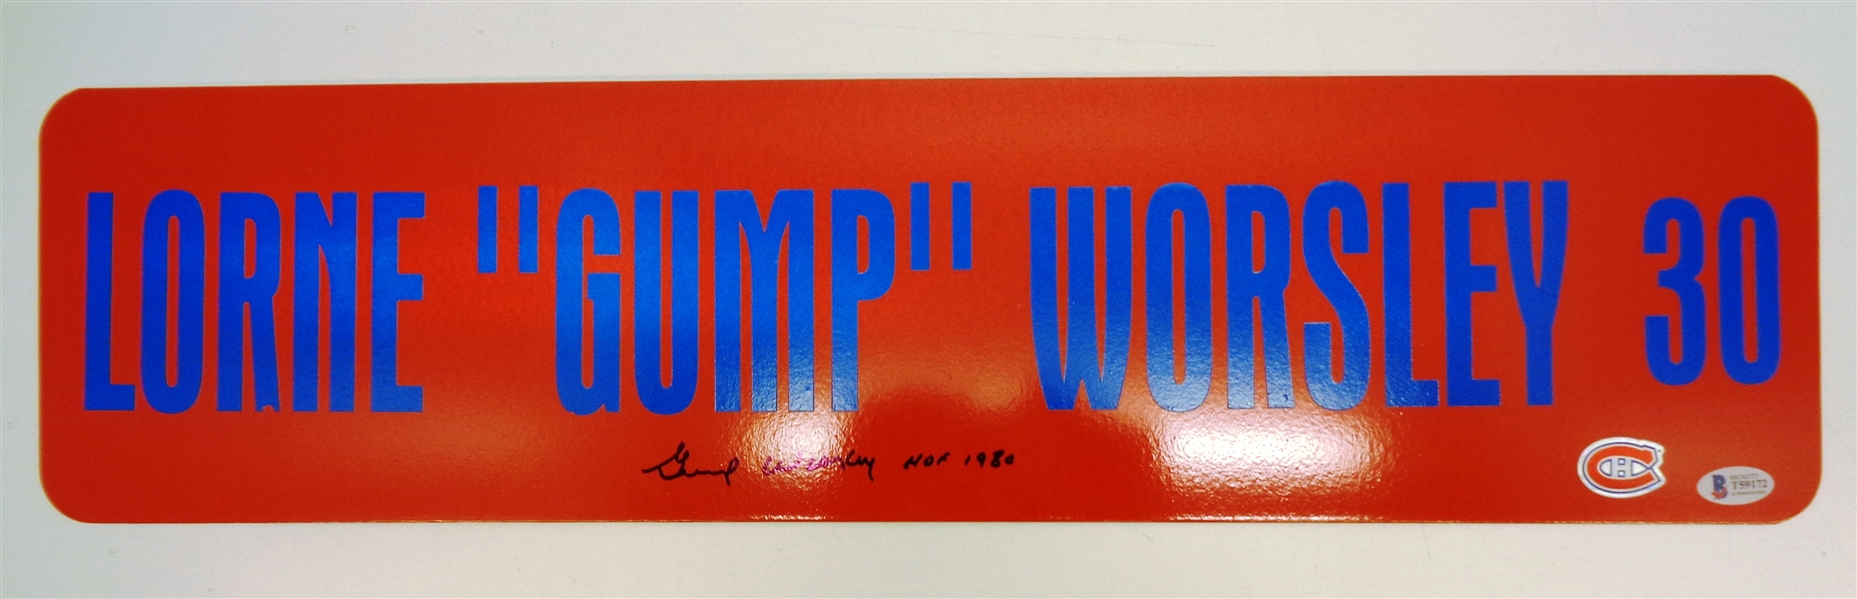 Gump Worsley Autographed 6x24 Street Sign